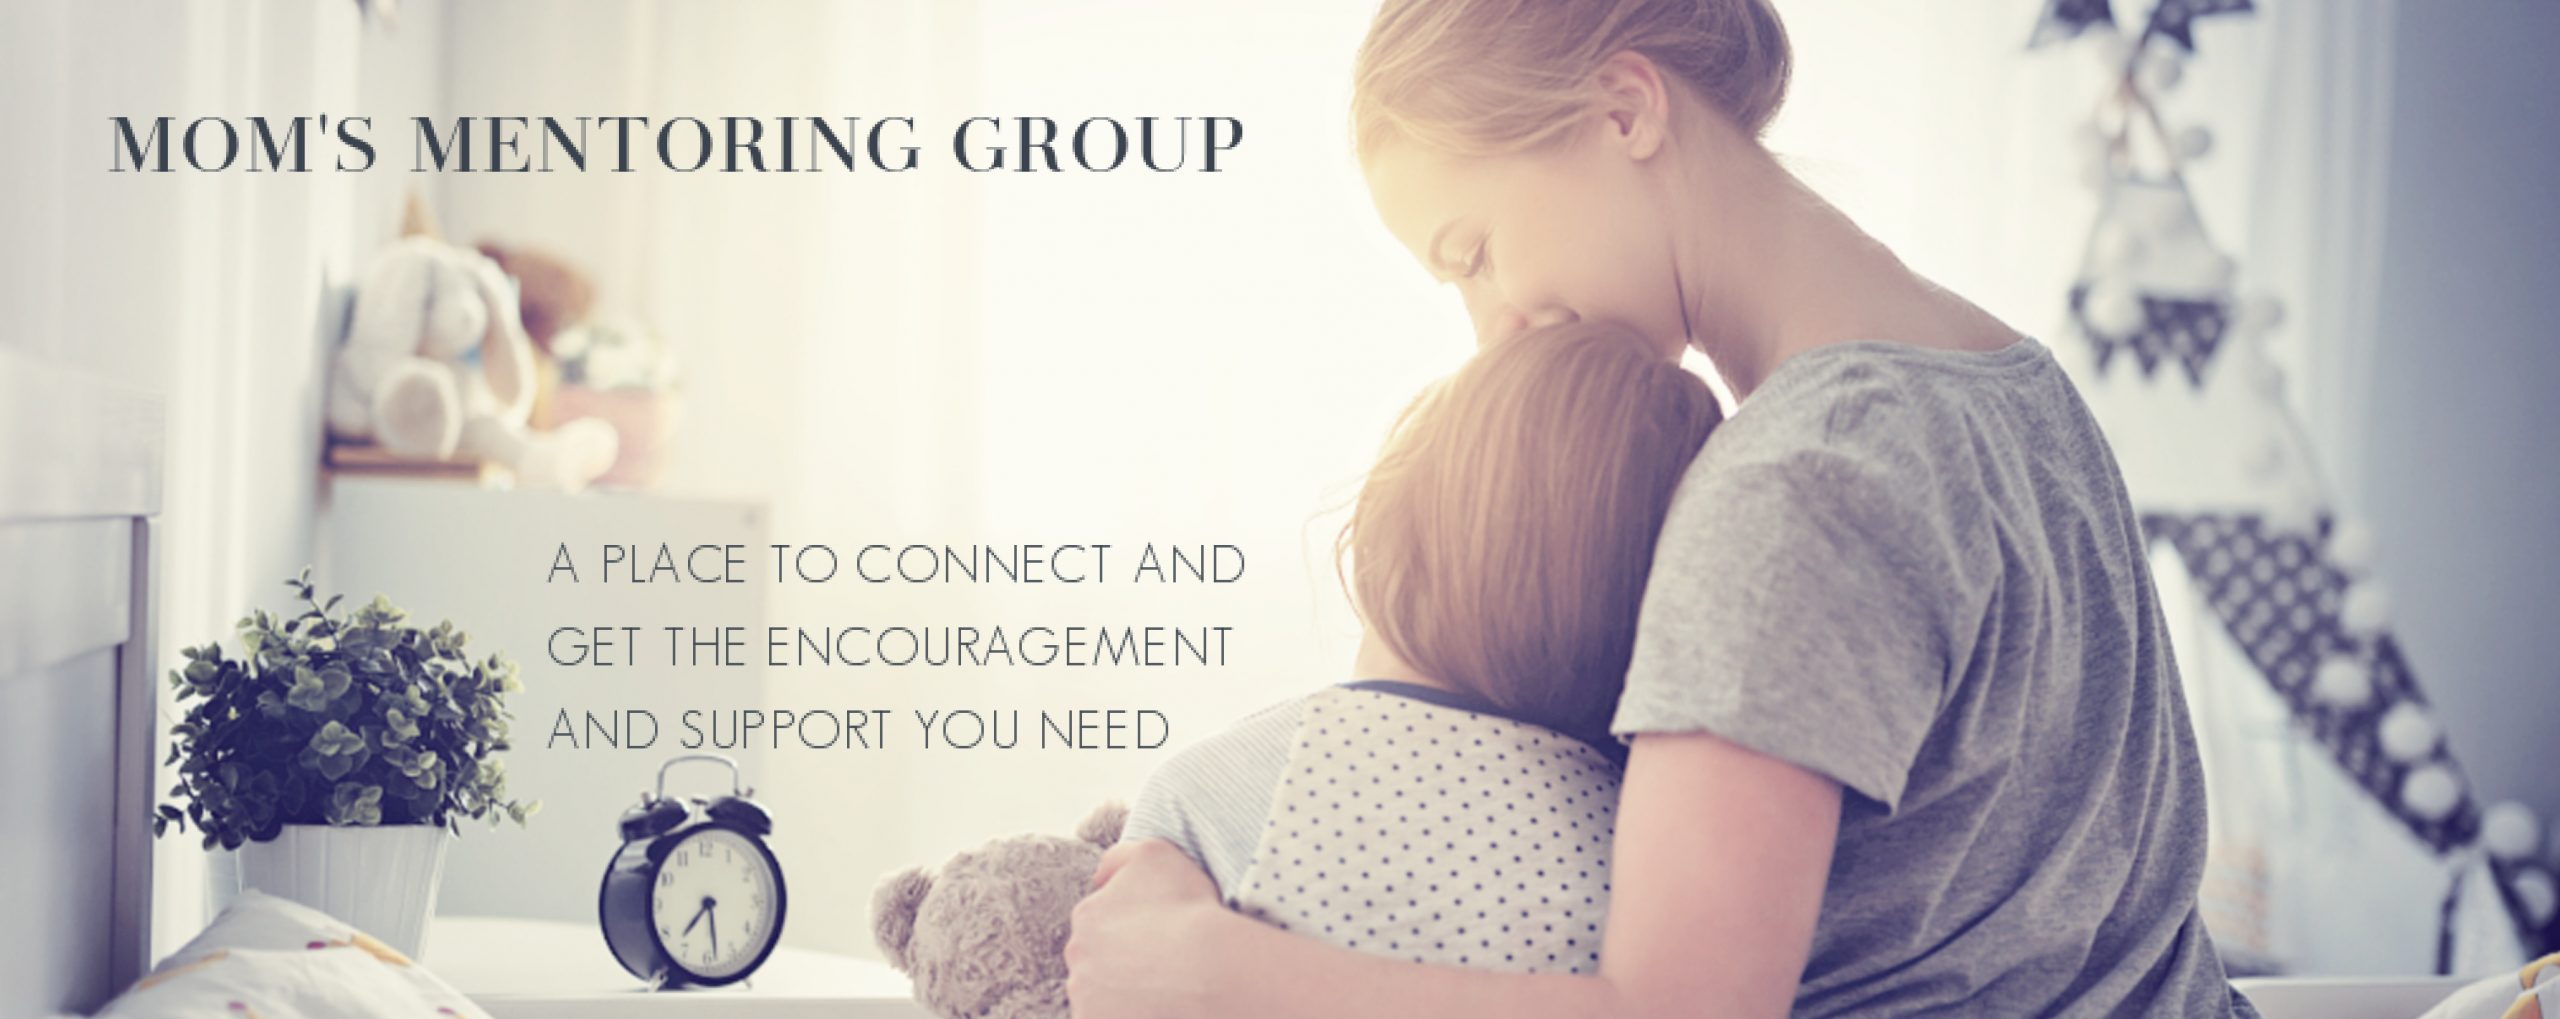 Mom's Mentoring Group